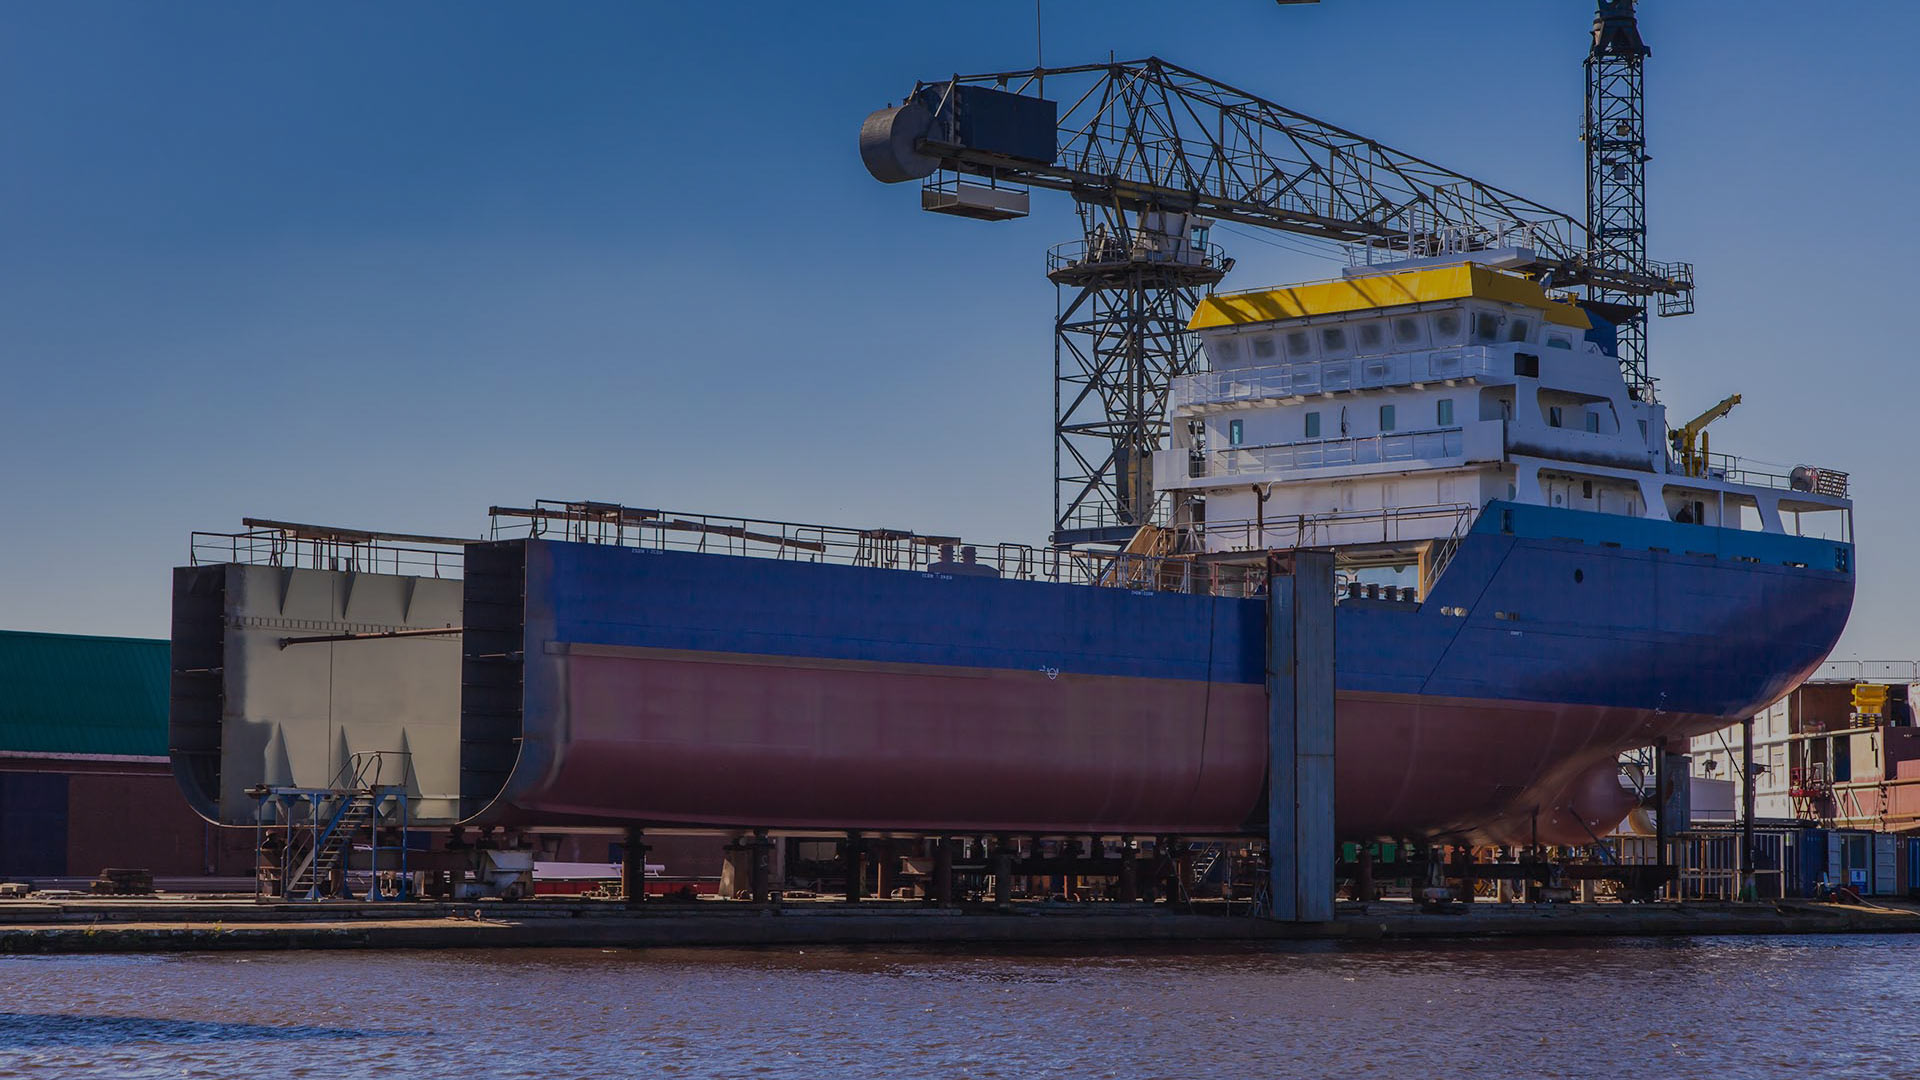 large cargo ship on land being repaired